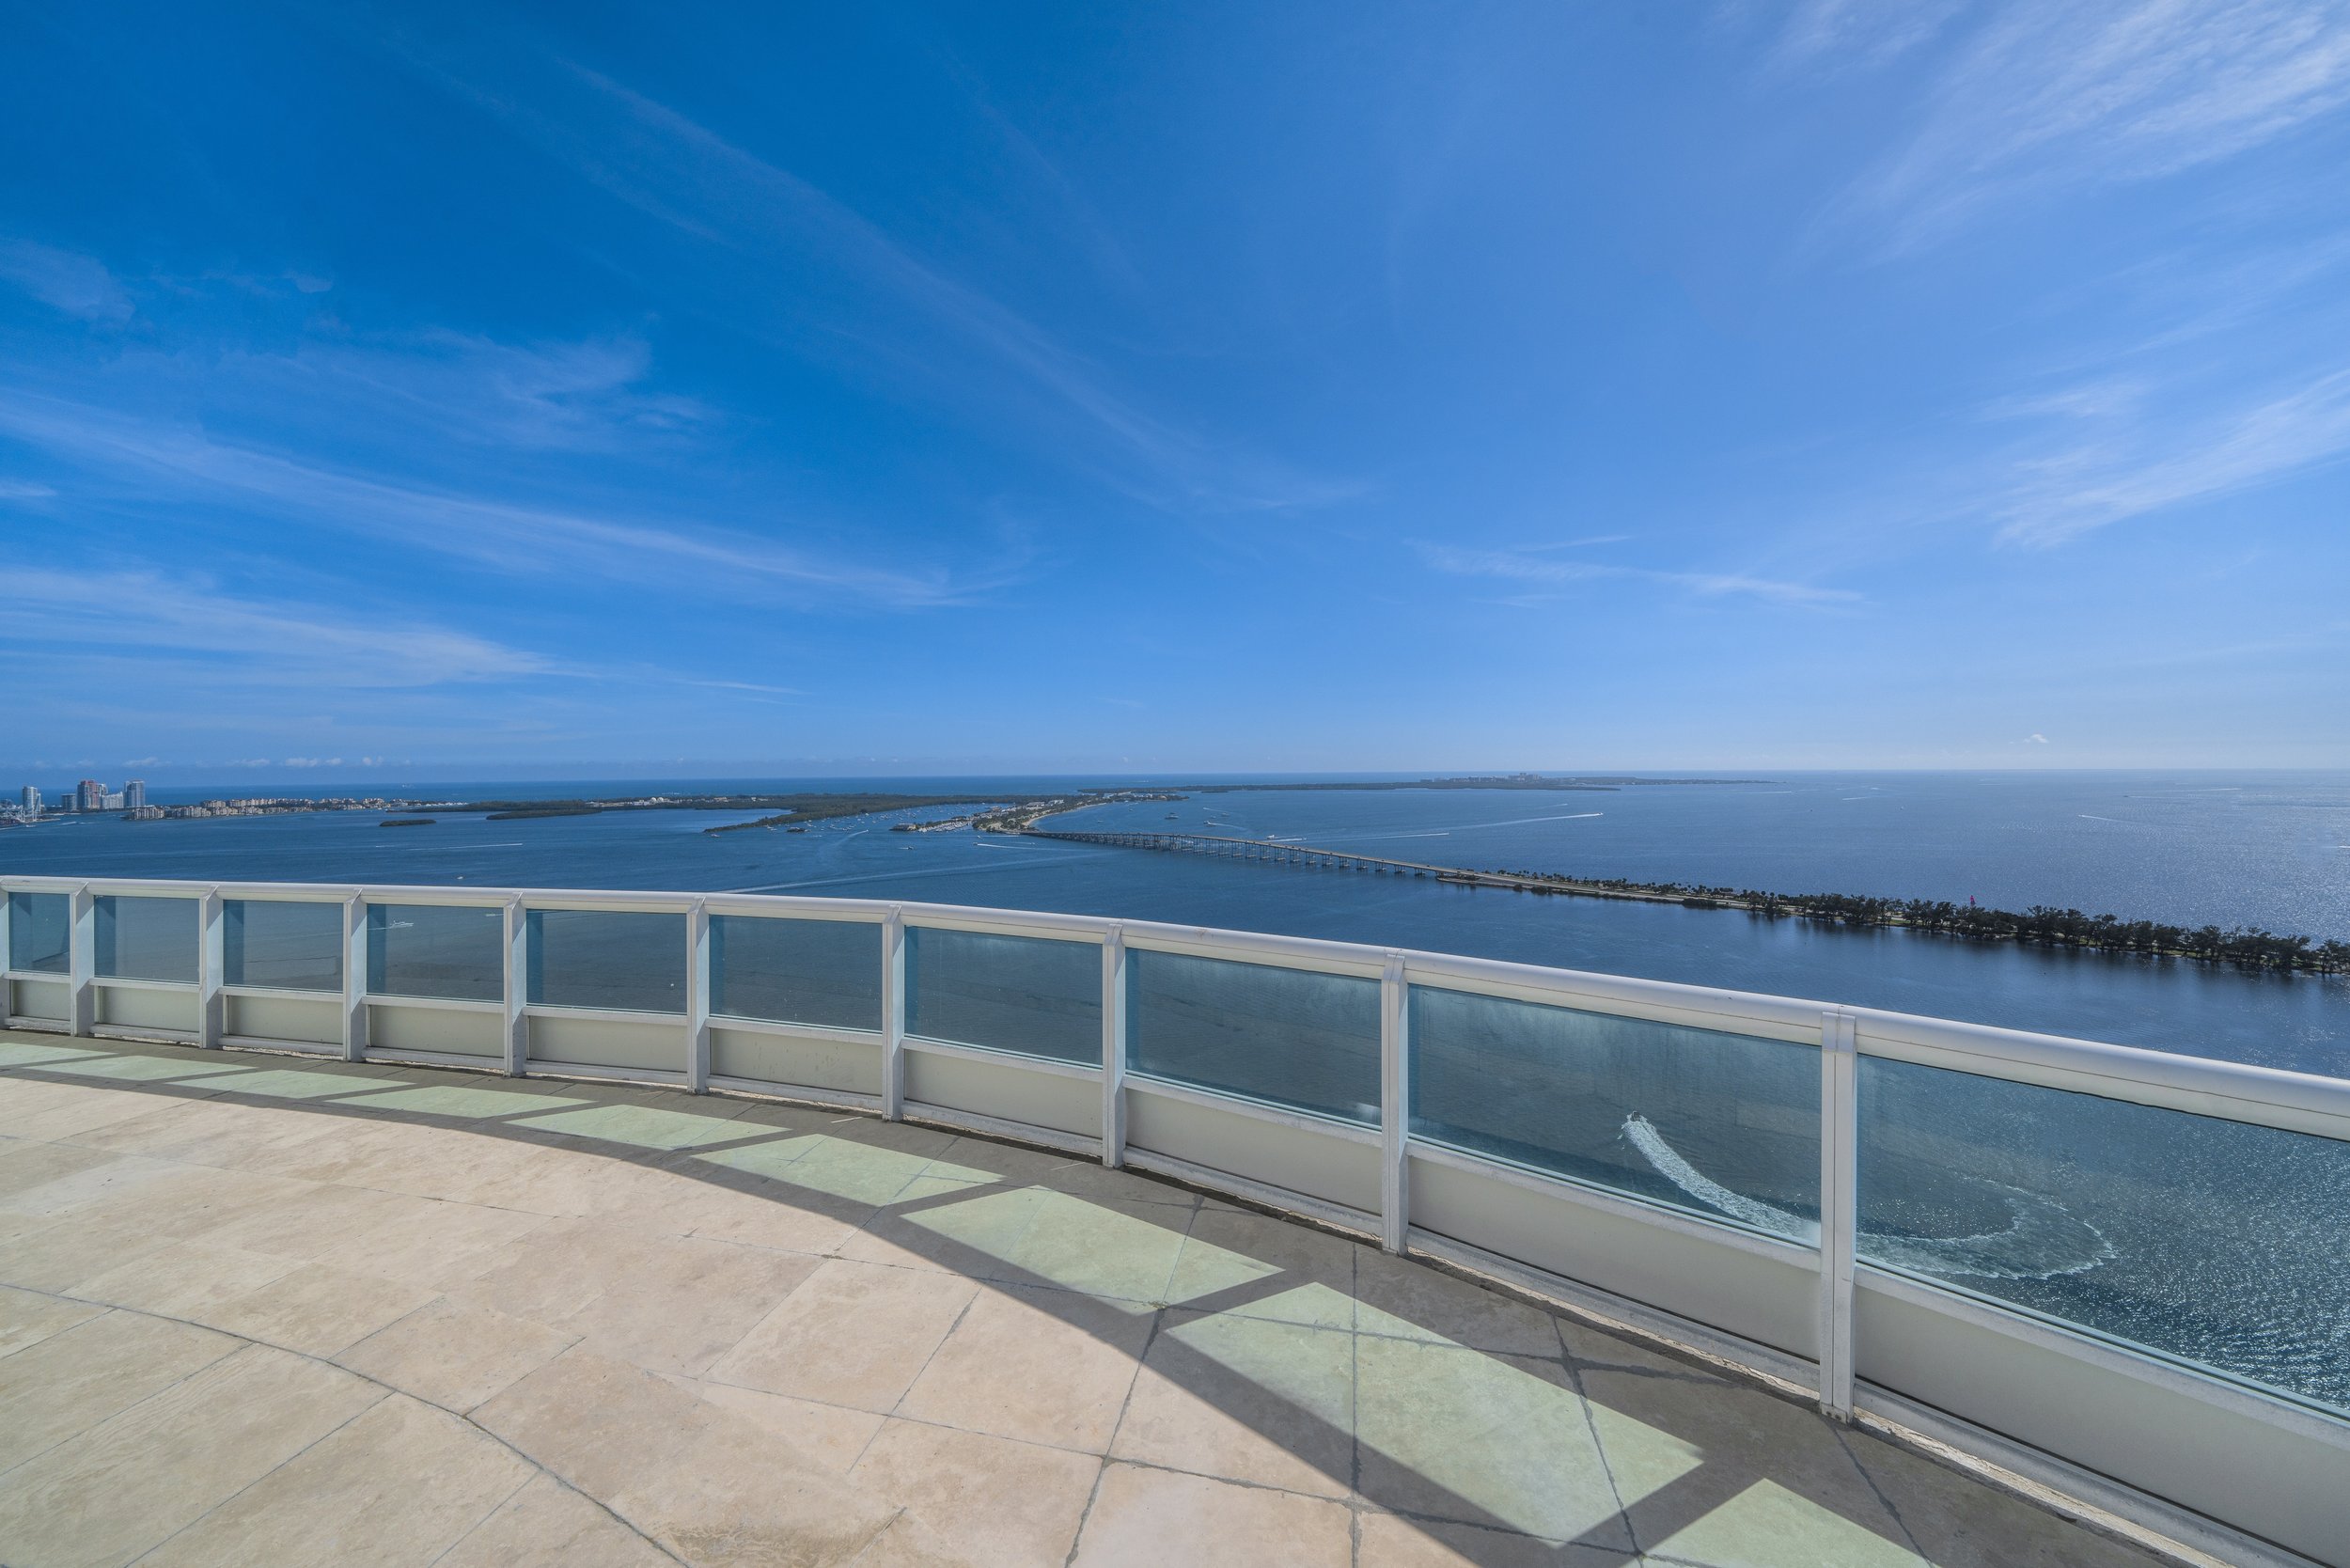 Beyonce, Elton John and Guns N' Roses Former Manager Lists Penthouse Atop Brickell's Exclusive Santa Maria Bayfront Condo Tower For $15 Million52.jpg